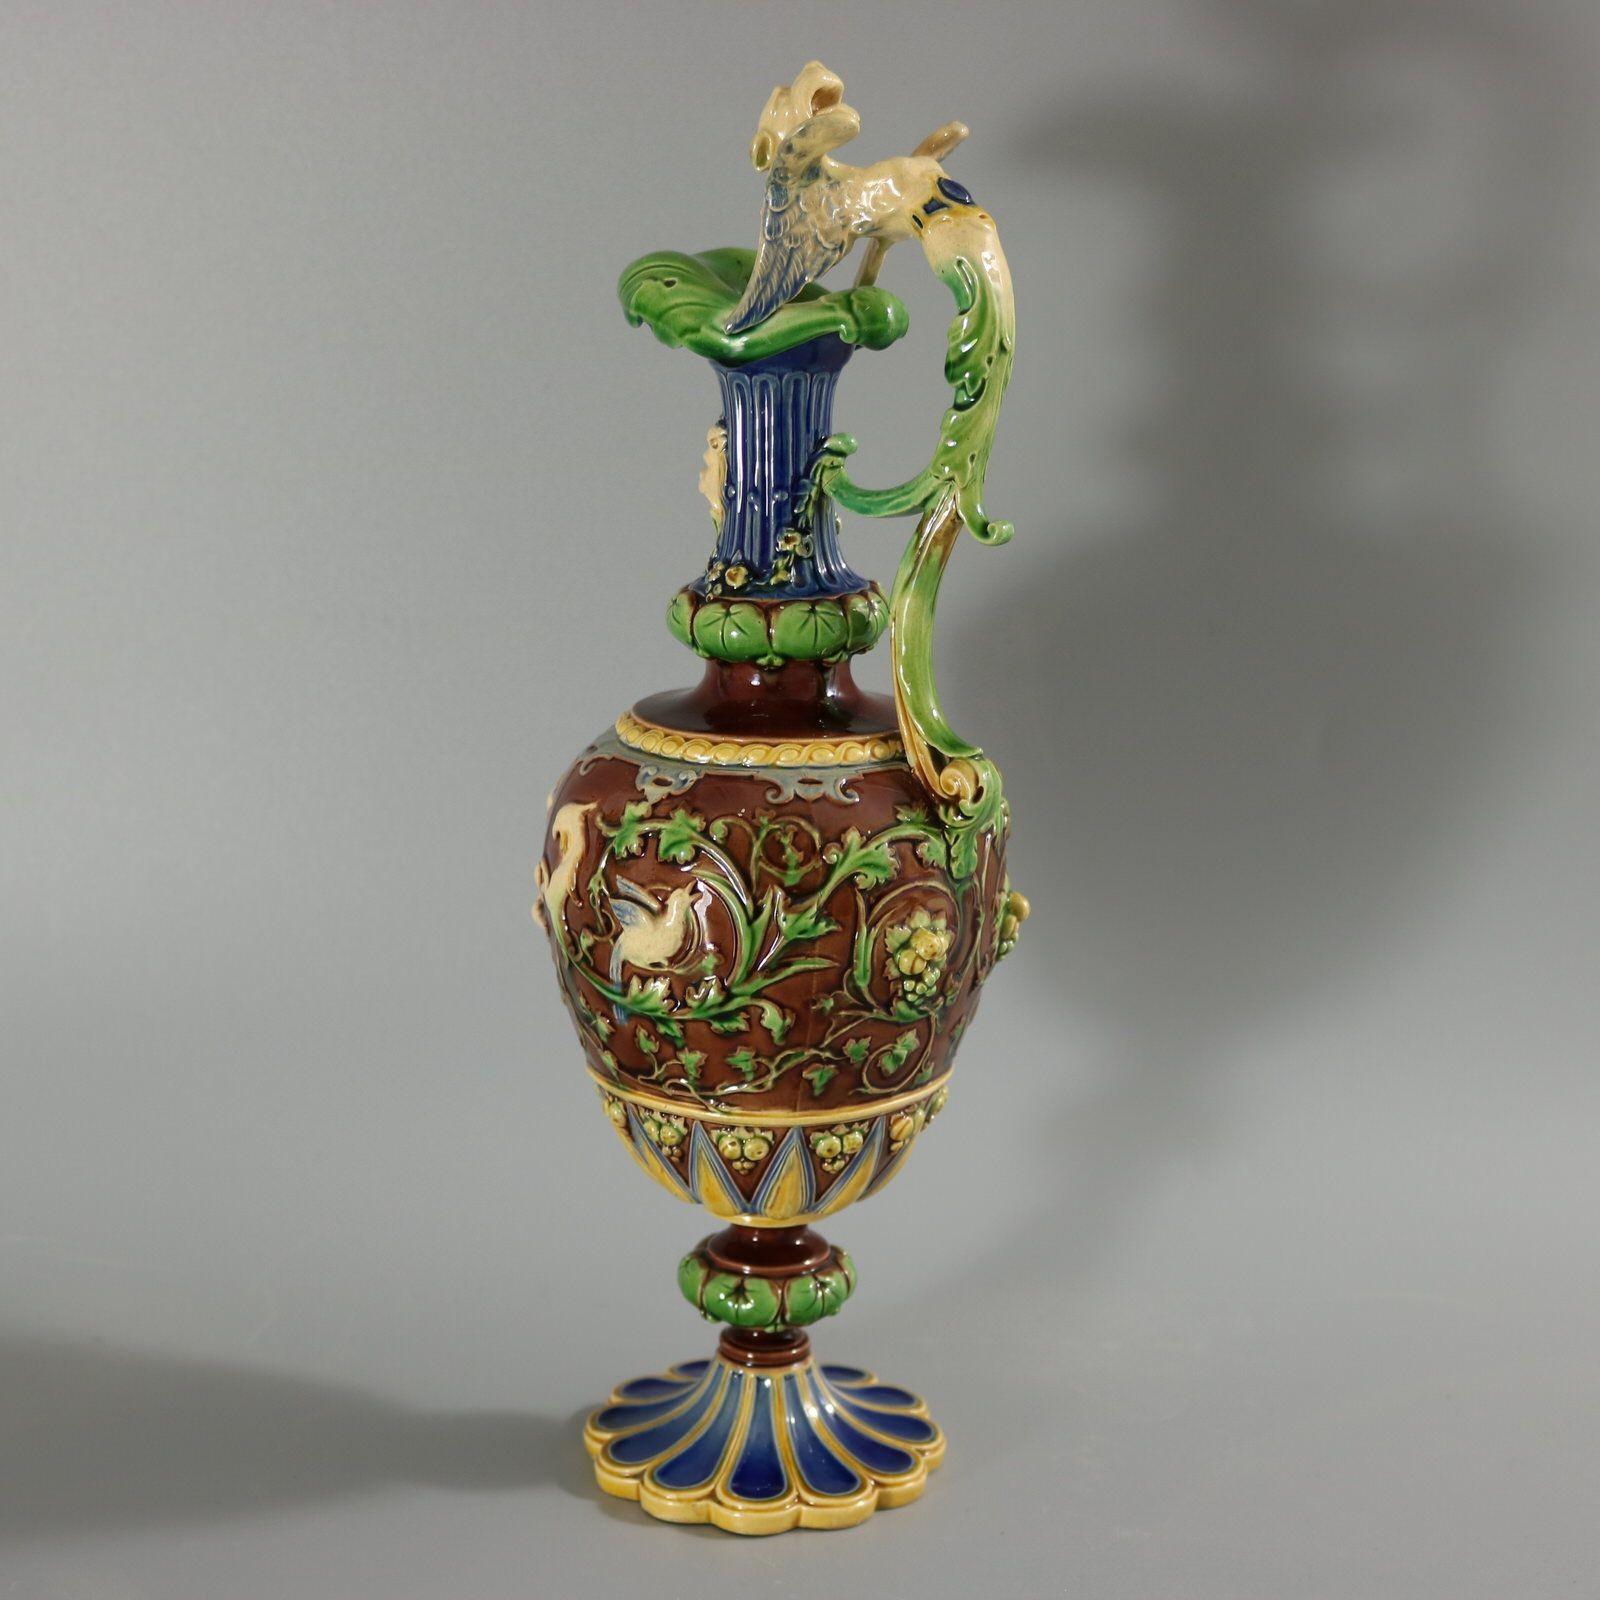 Minton Majolica ewer with a mythological theme which features putti, birds and vine fruits. The ewer has a tapered neck, with mask head and Sphinx handle. Sits on circular fluted foot. Colouration: brown, green, blue, are predominant. Marks include